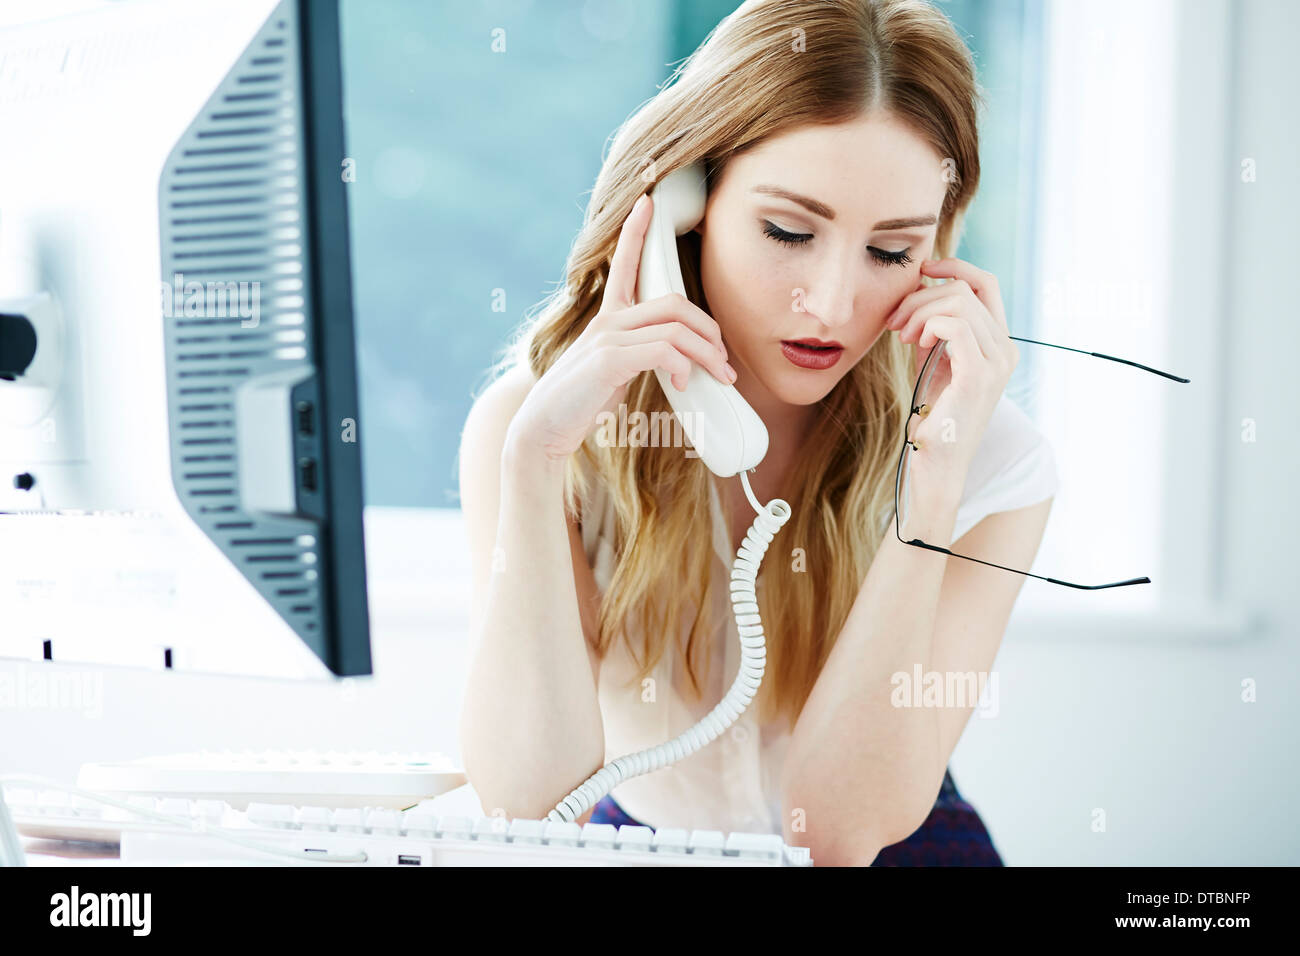 Girl stressed at work Stock Photo